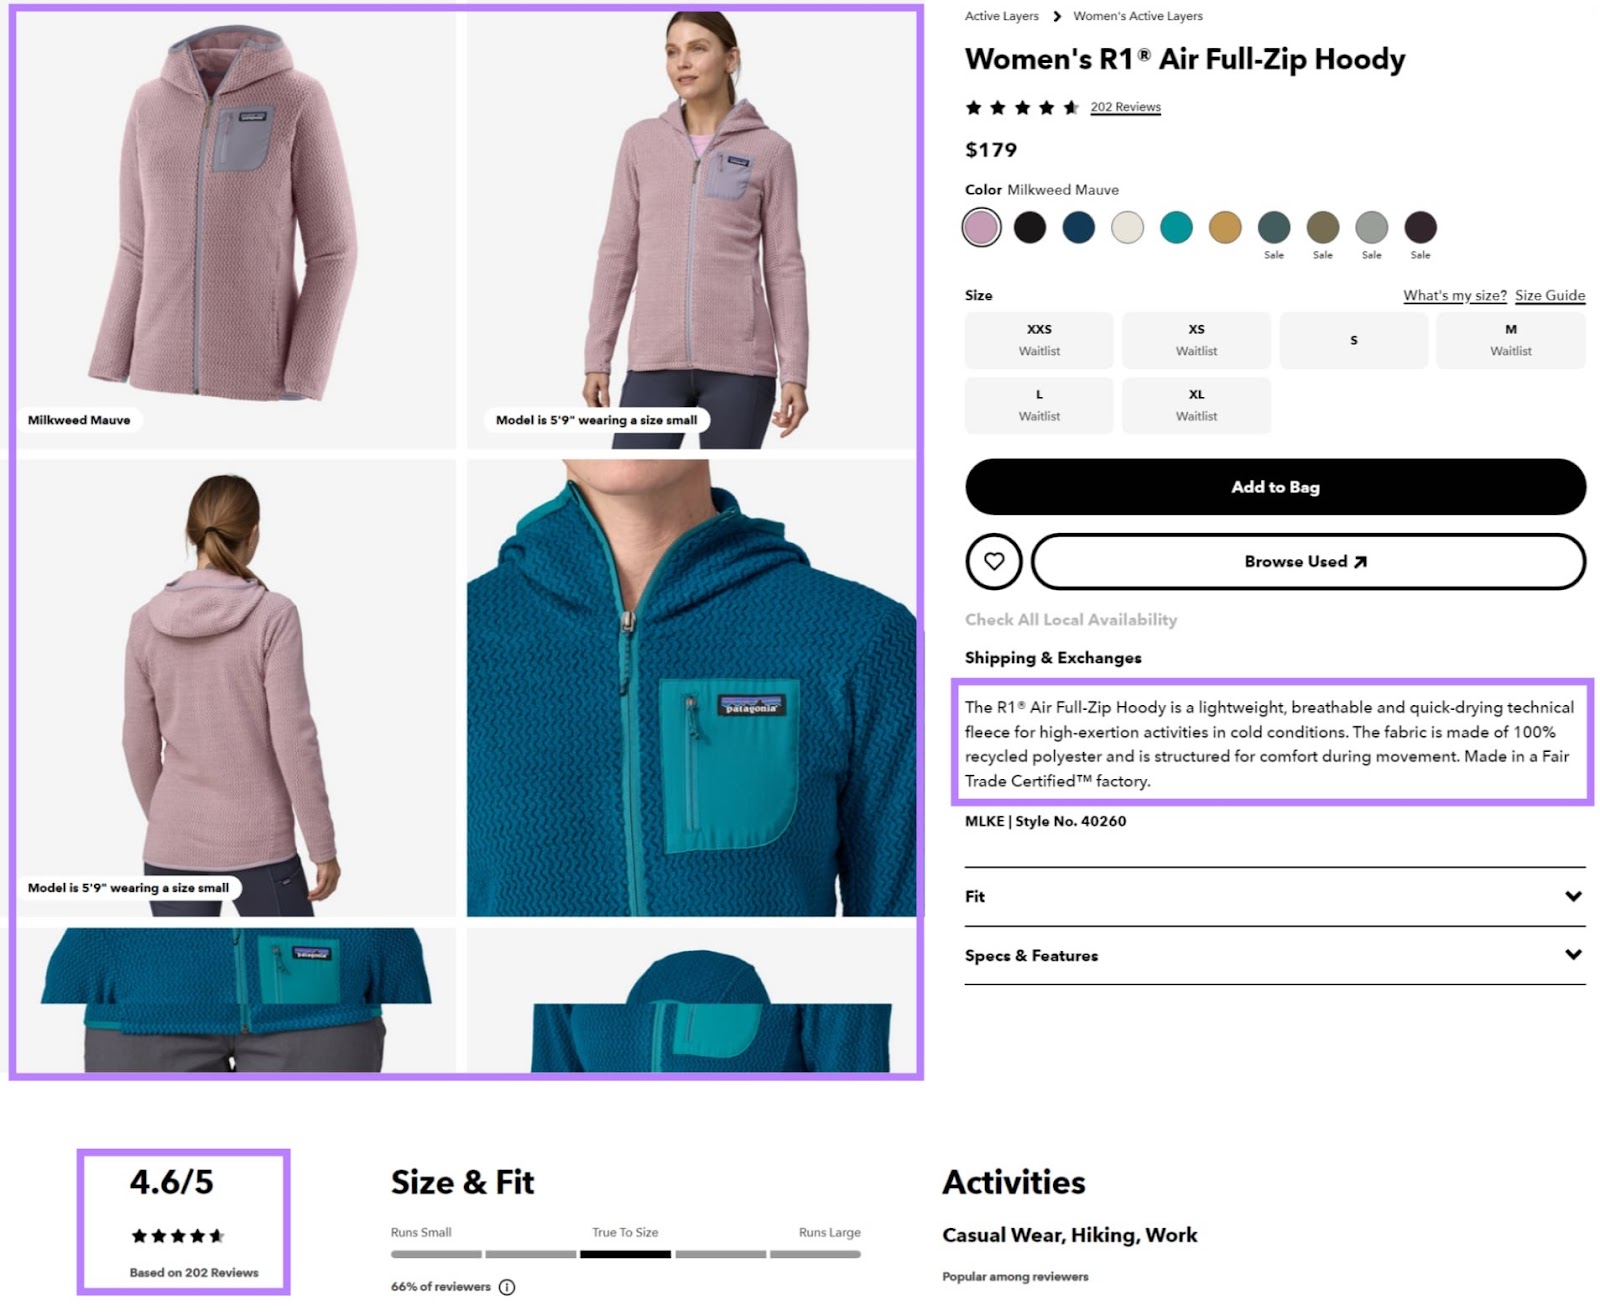 A product page for women's hoody from Patagonia: